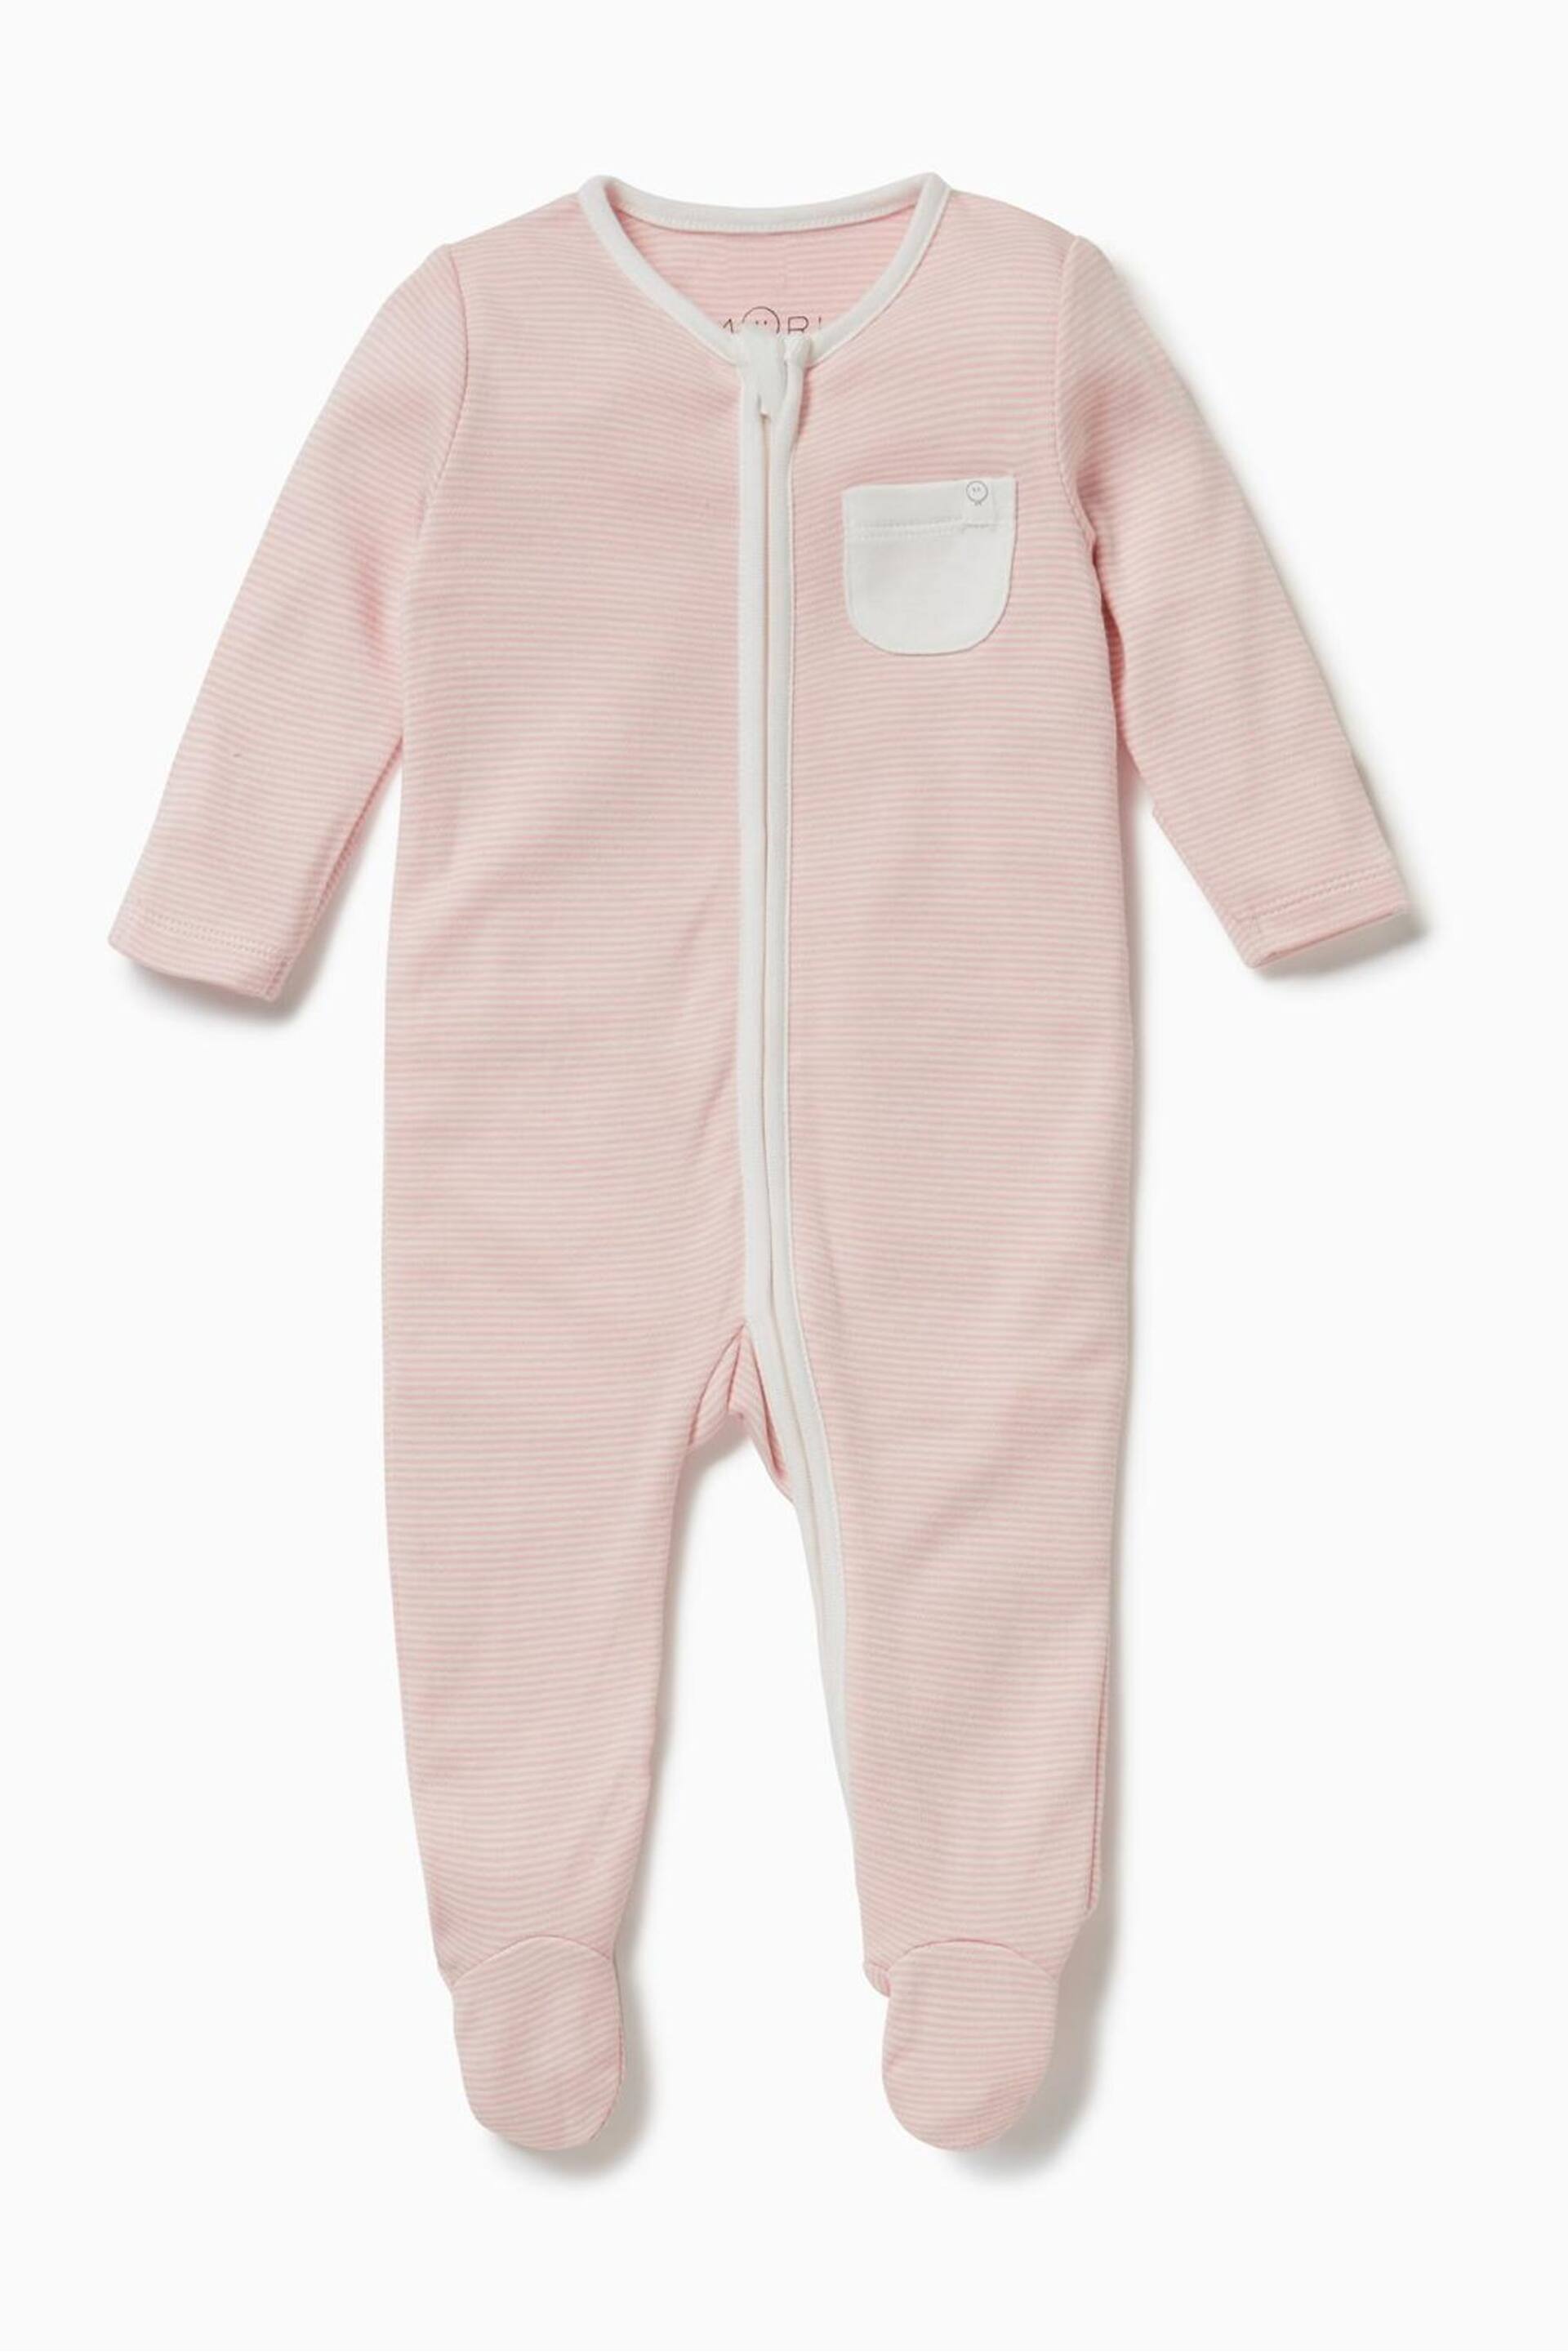 Mori Organic Cotton & Bamboo Clever Zip Up Sleepsuit - Image 3 of 5